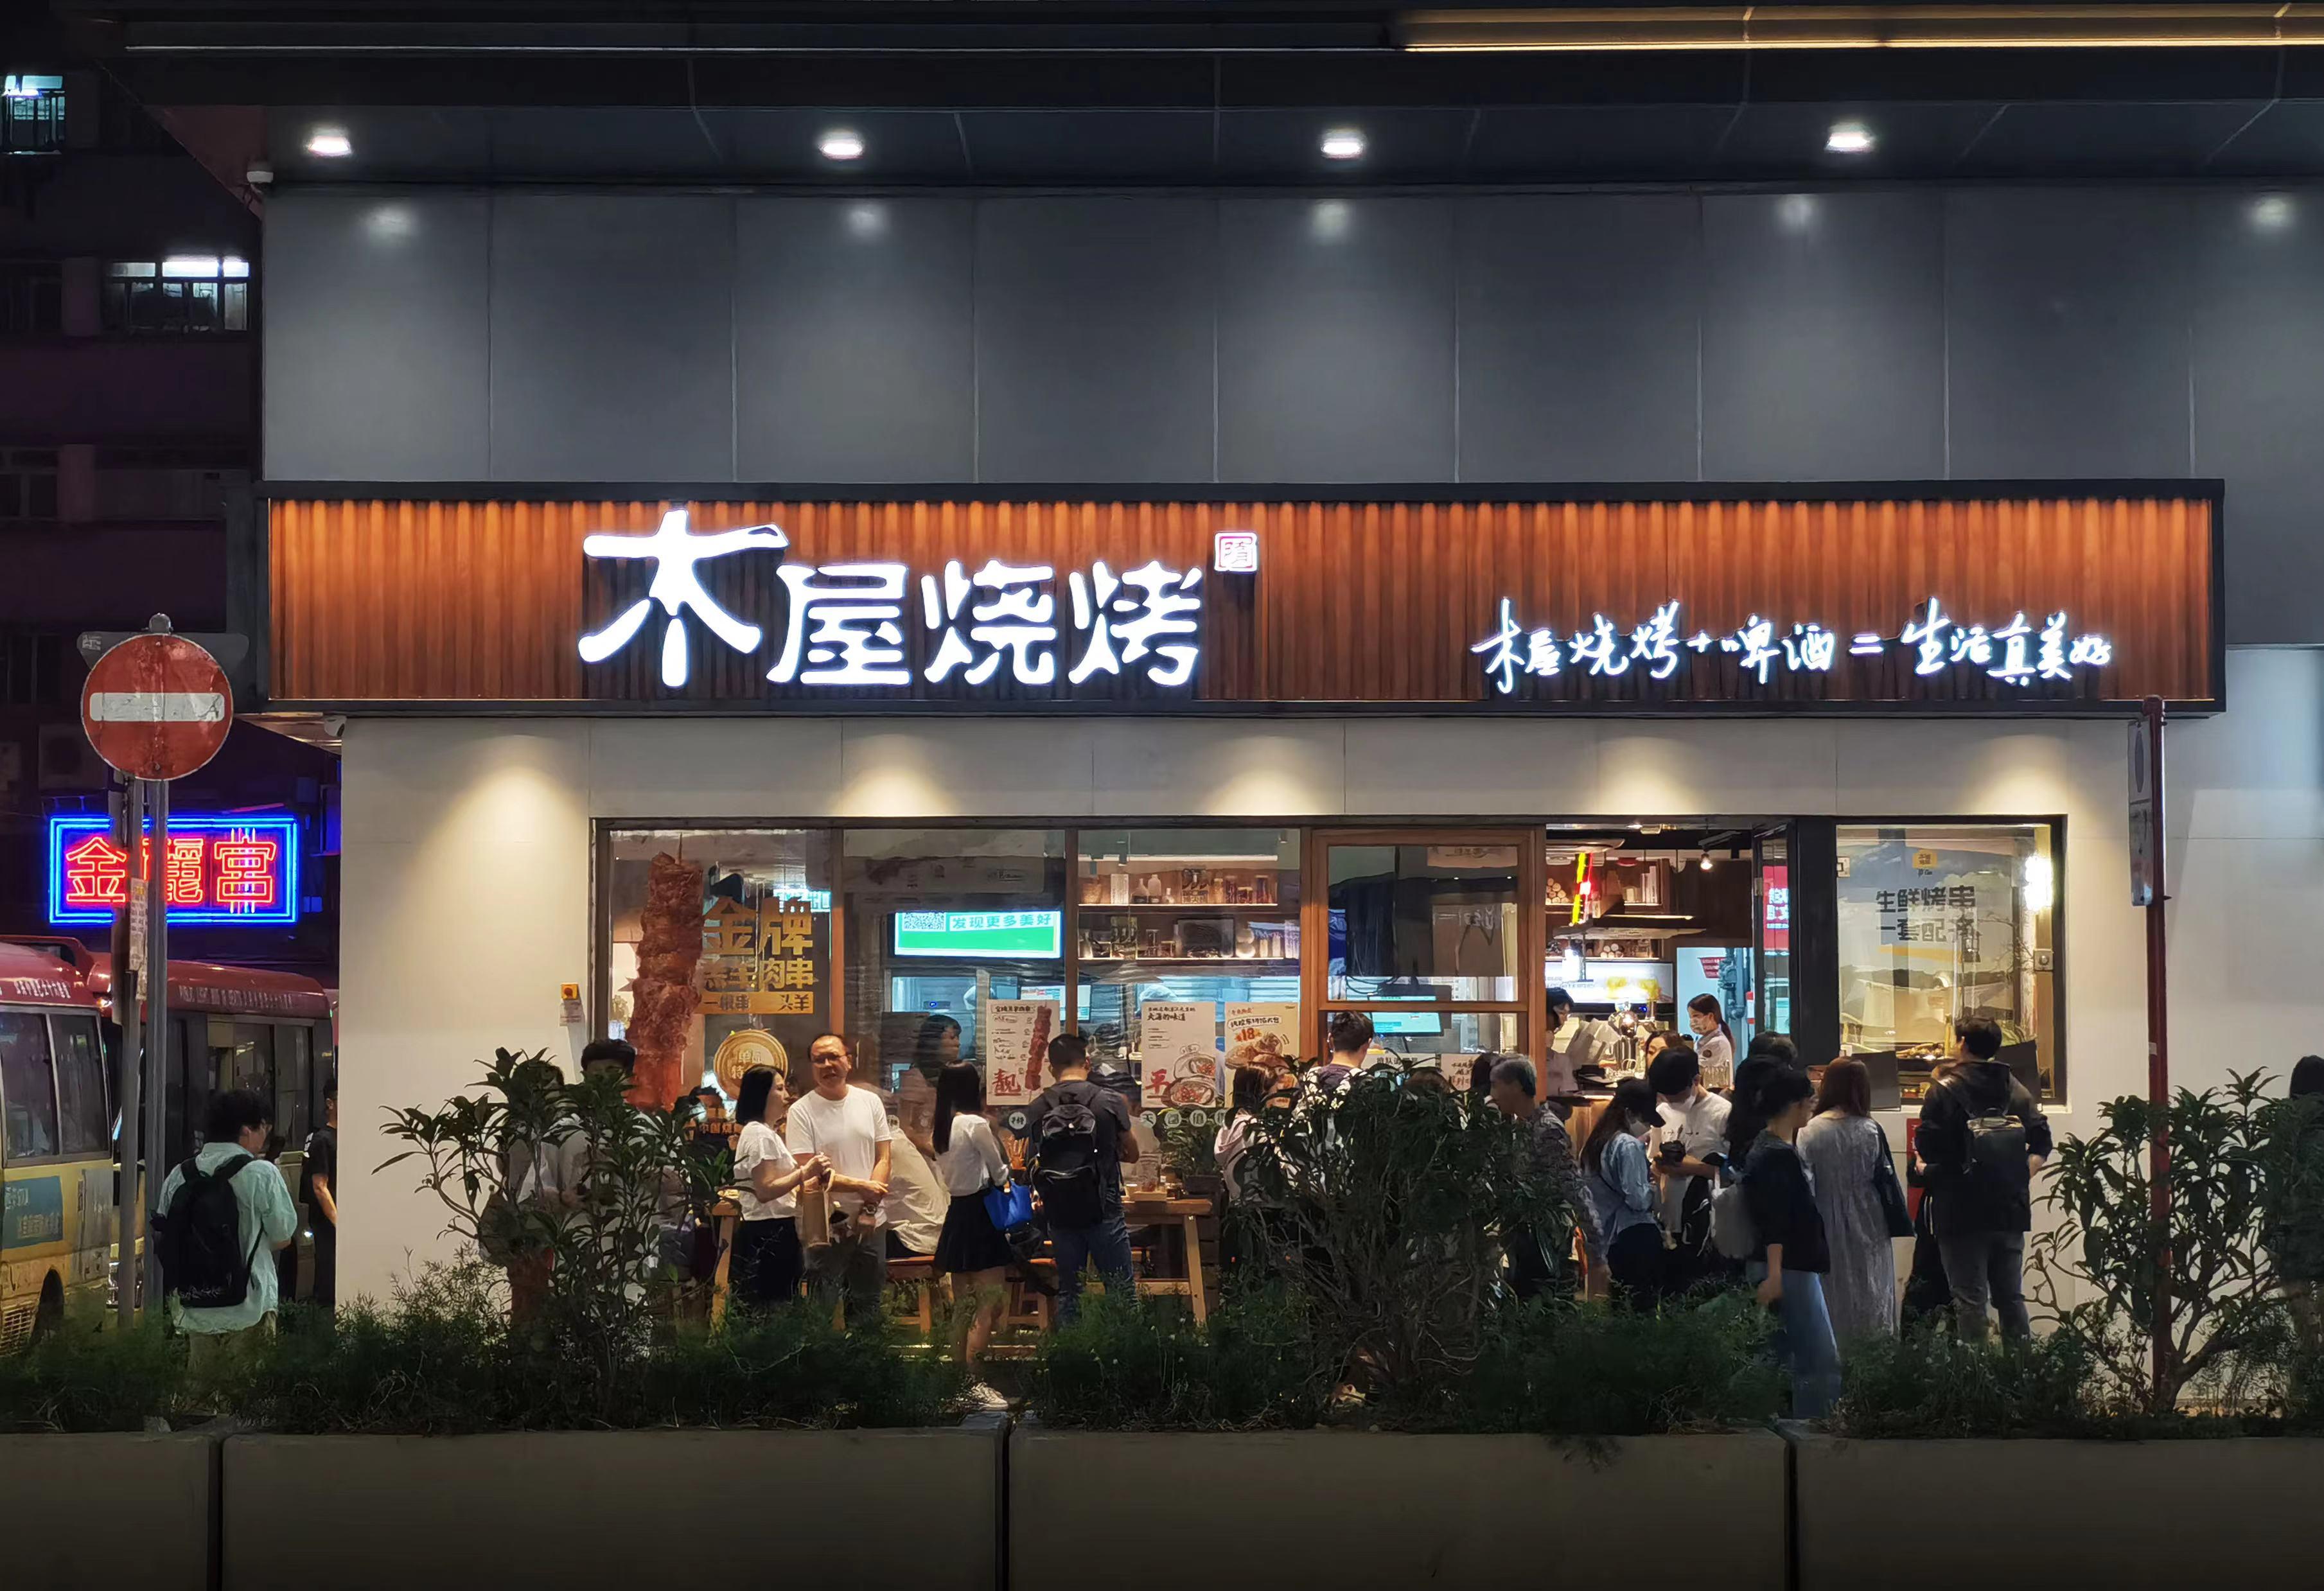 Invest Hong Kong announced today (April 9) that its client, Mainland barbecue chain Muwu BBQ, will officially open its debut store in Mongkok next Monday (April 15) and is planning to open a second one in Western district next month, as part of a global expansion.

